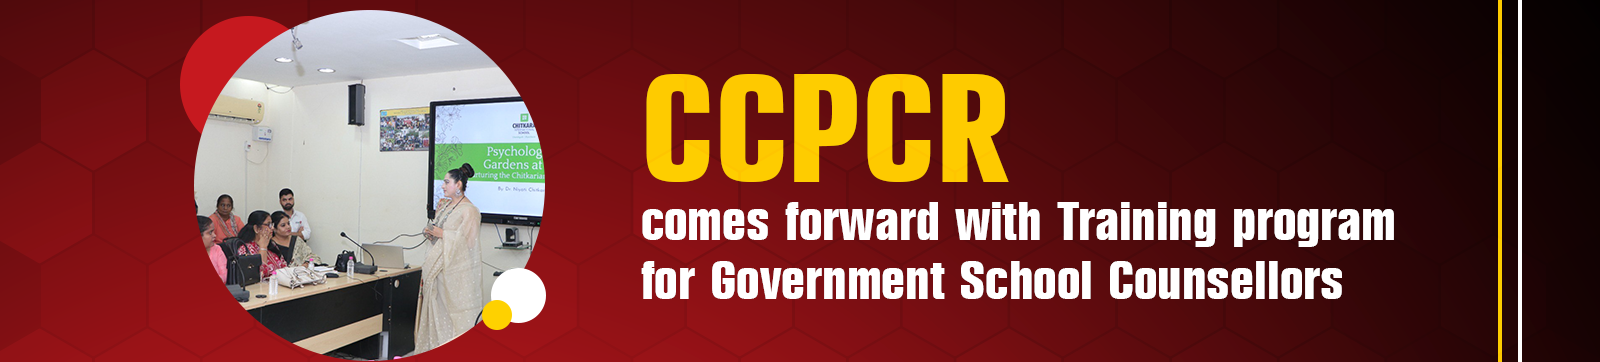 CCPCR Comes Forward with Training Program for Government School Counsellors